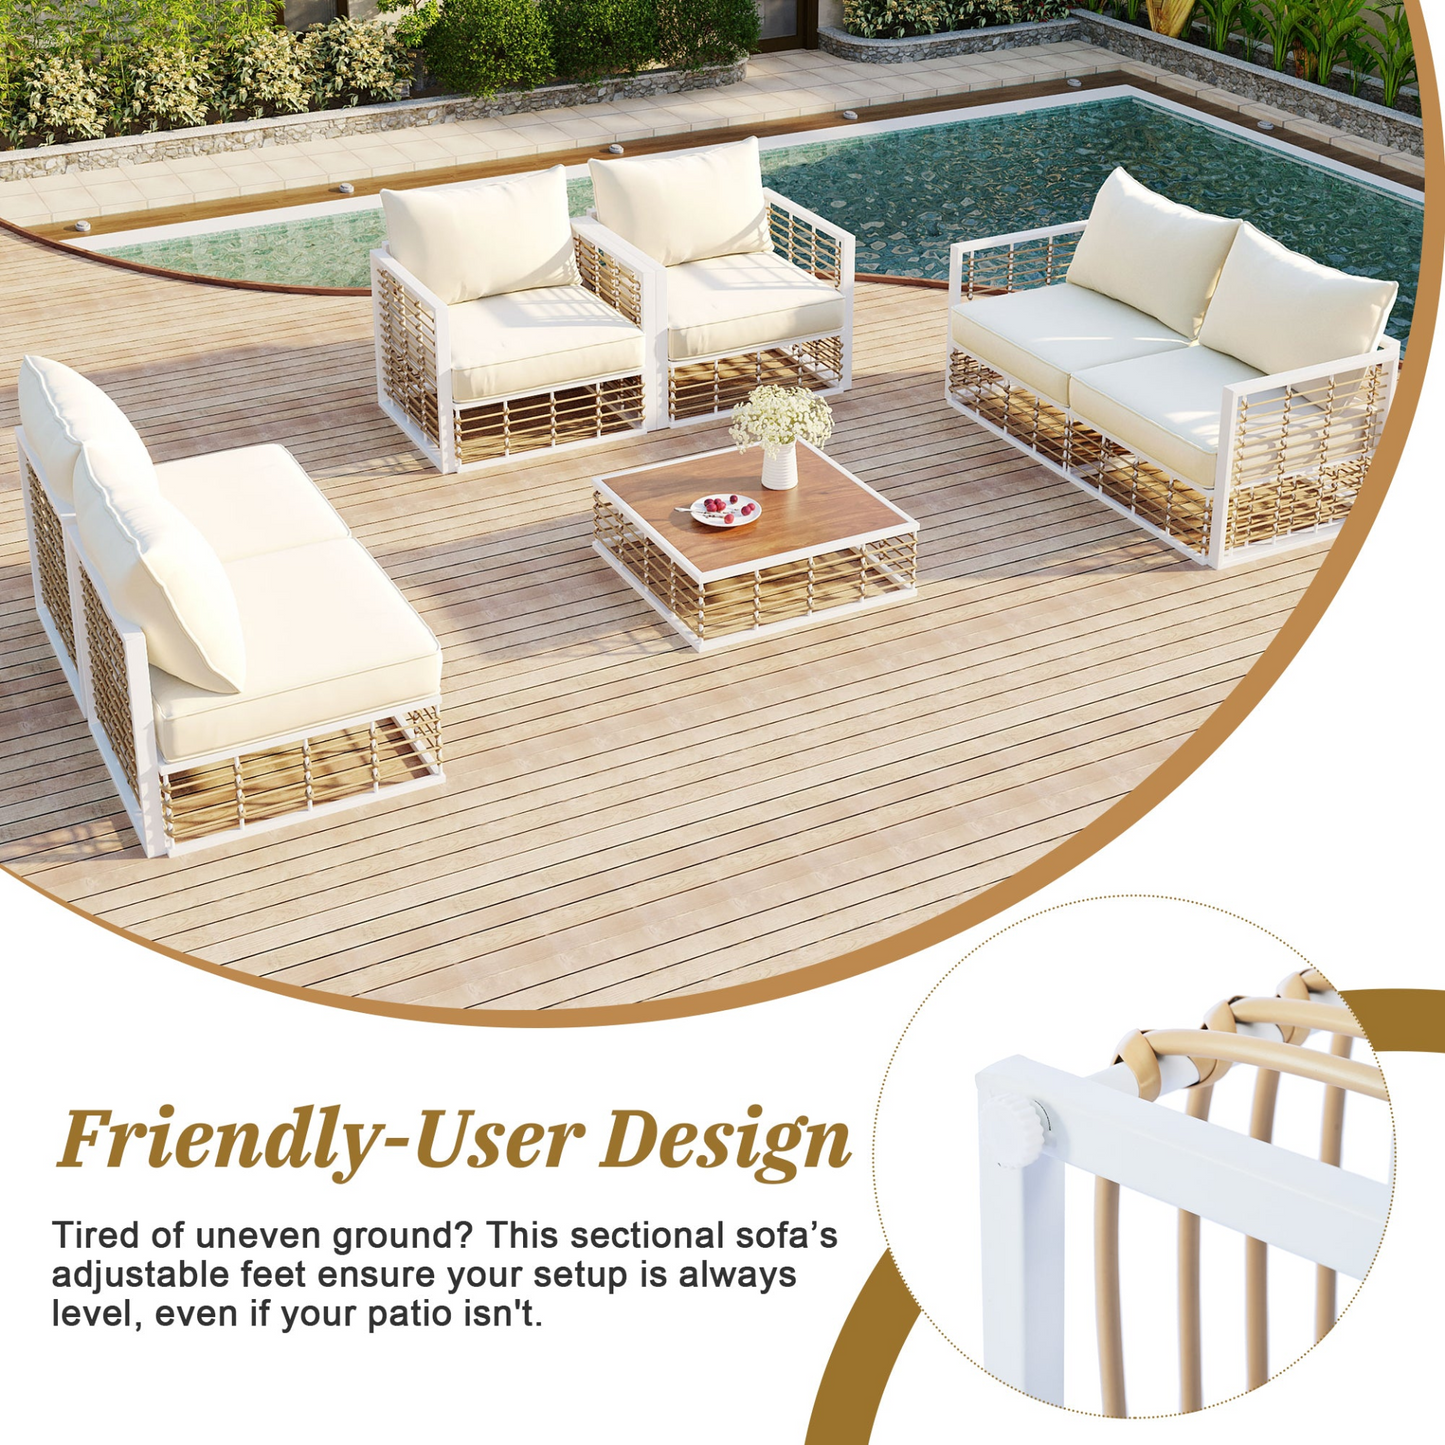 Modern Minimalist 7-Piece Metal Patio Sectional Sofa Set, All-Weather Garden Conversational Furniture Set with Thick Cushions and Coffee Table for Indoor Outdoor, White Môdern Space Gallery